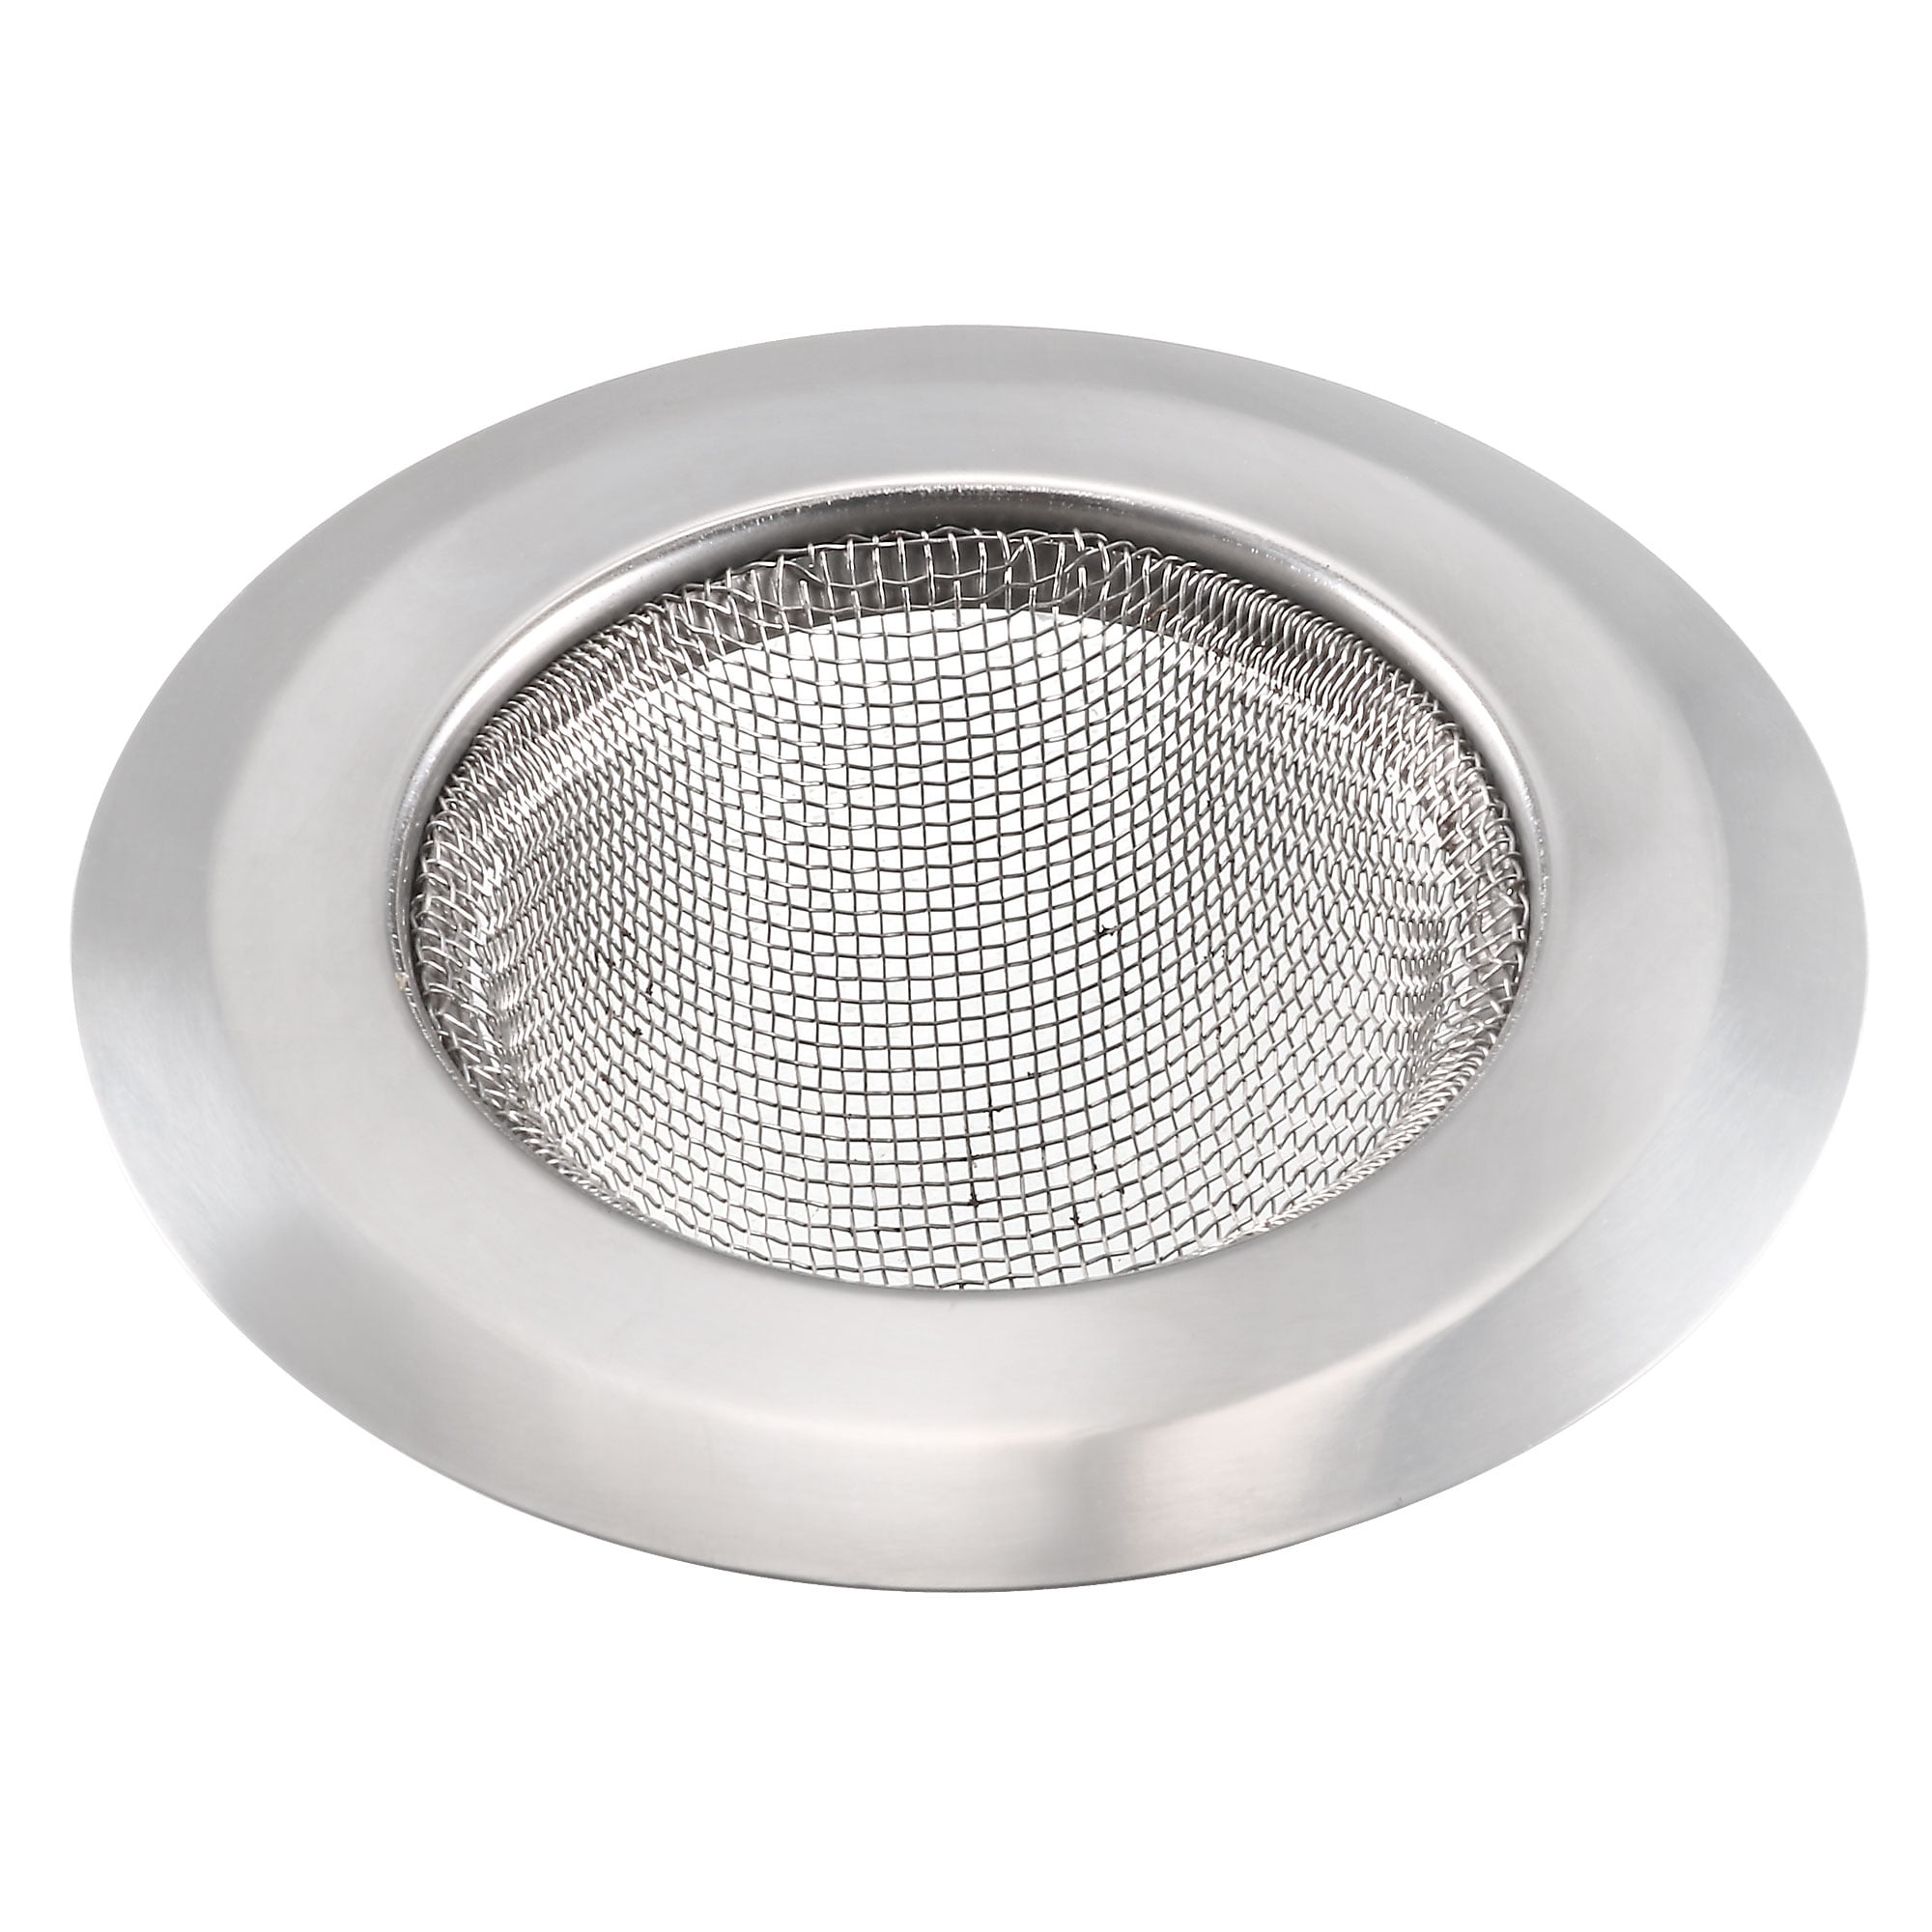 Silver Tone Uxcell Home Water Sink Drainer Strainer with 3.1 Dia 